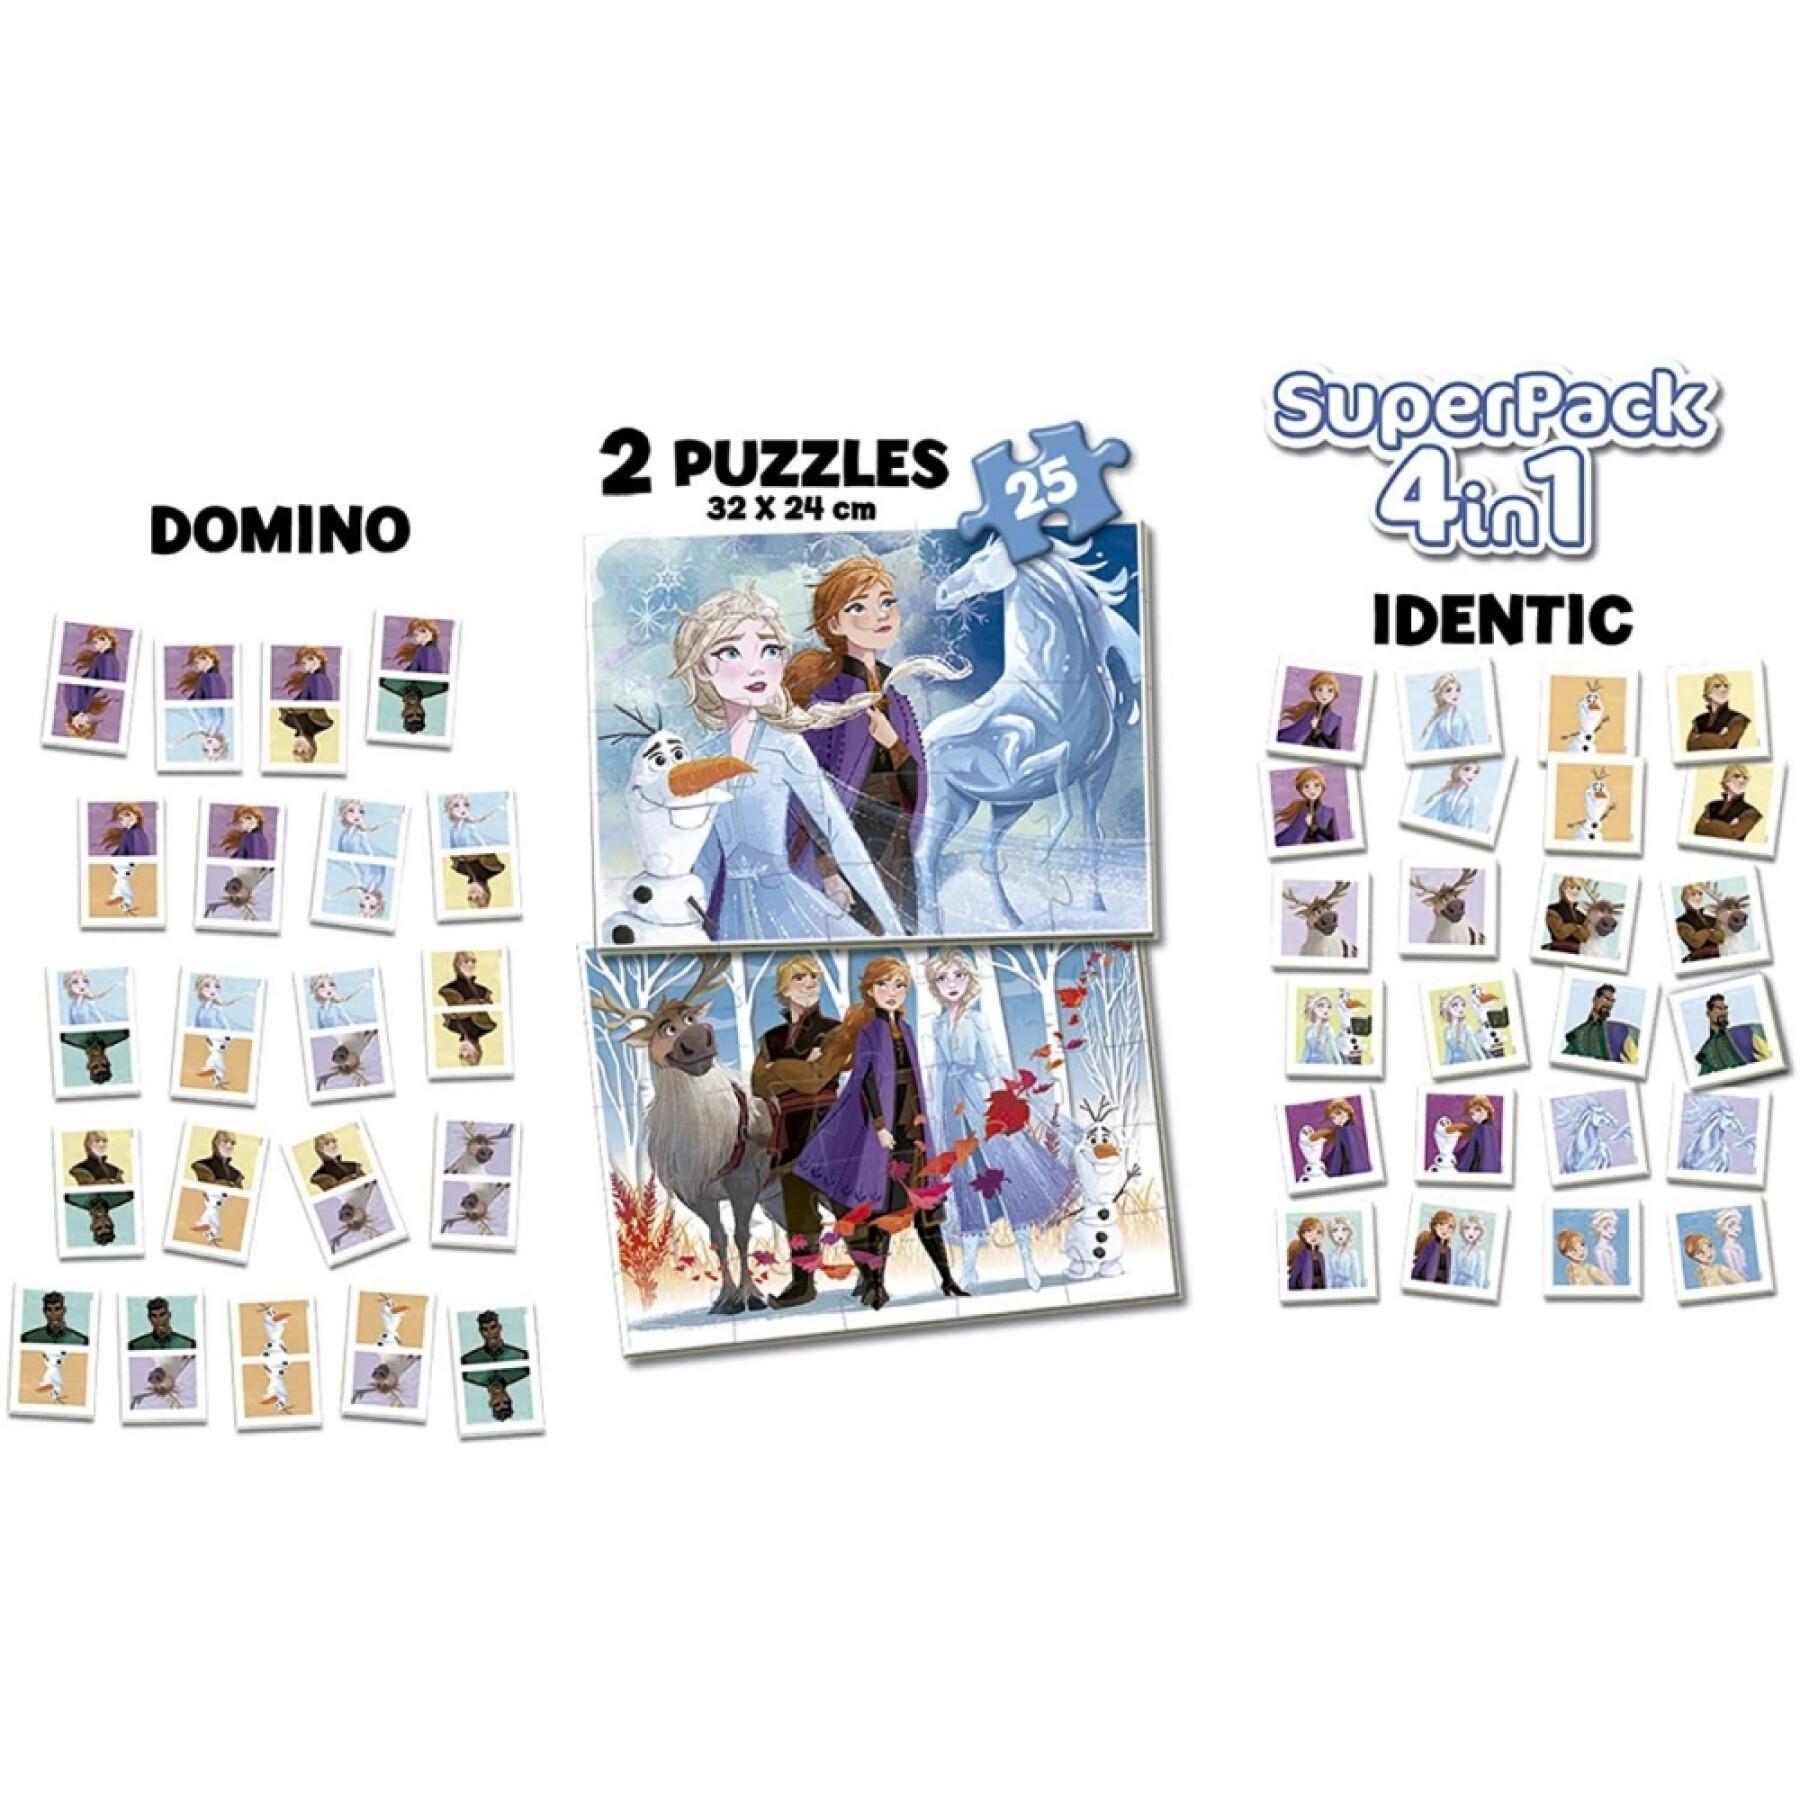 4 in 1 puzzle Frozen Superpack